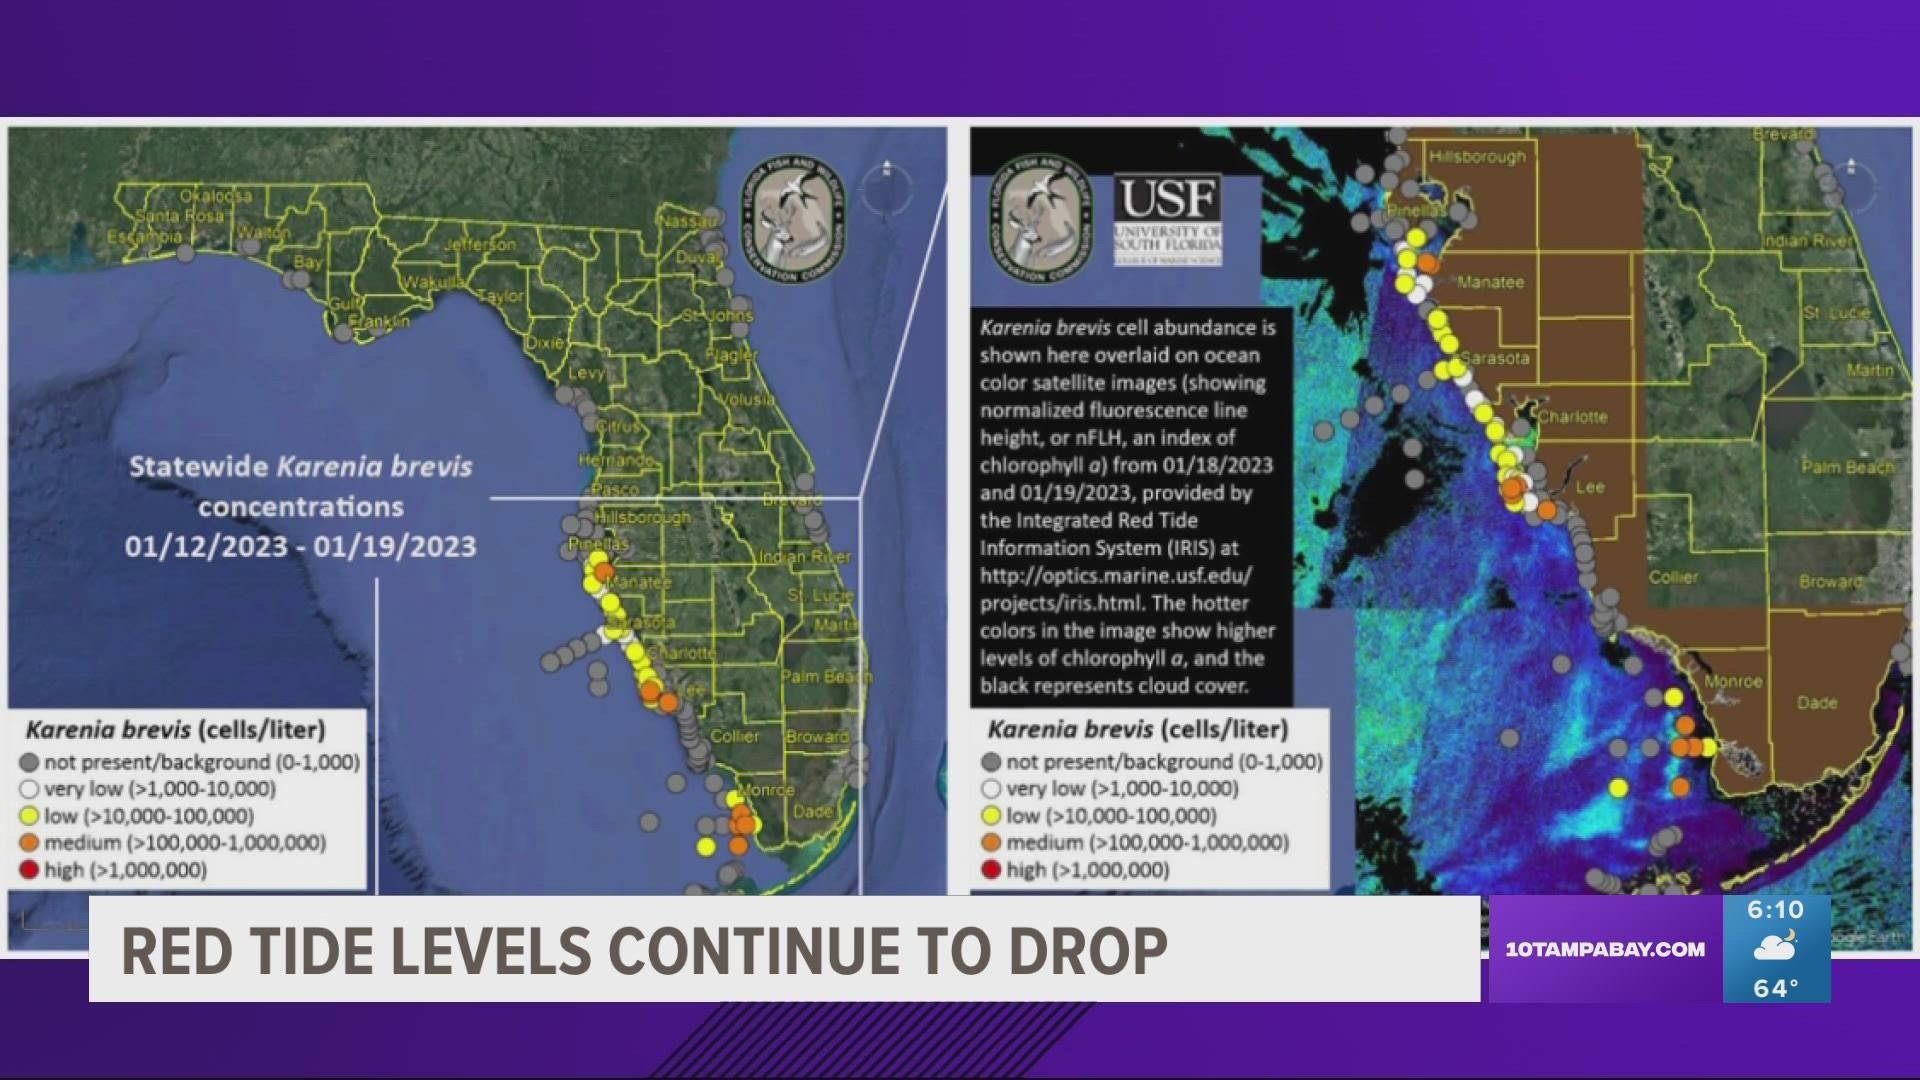 There were reports of fish kills related to red tide in Manatee and Sarasota counties over the past week.